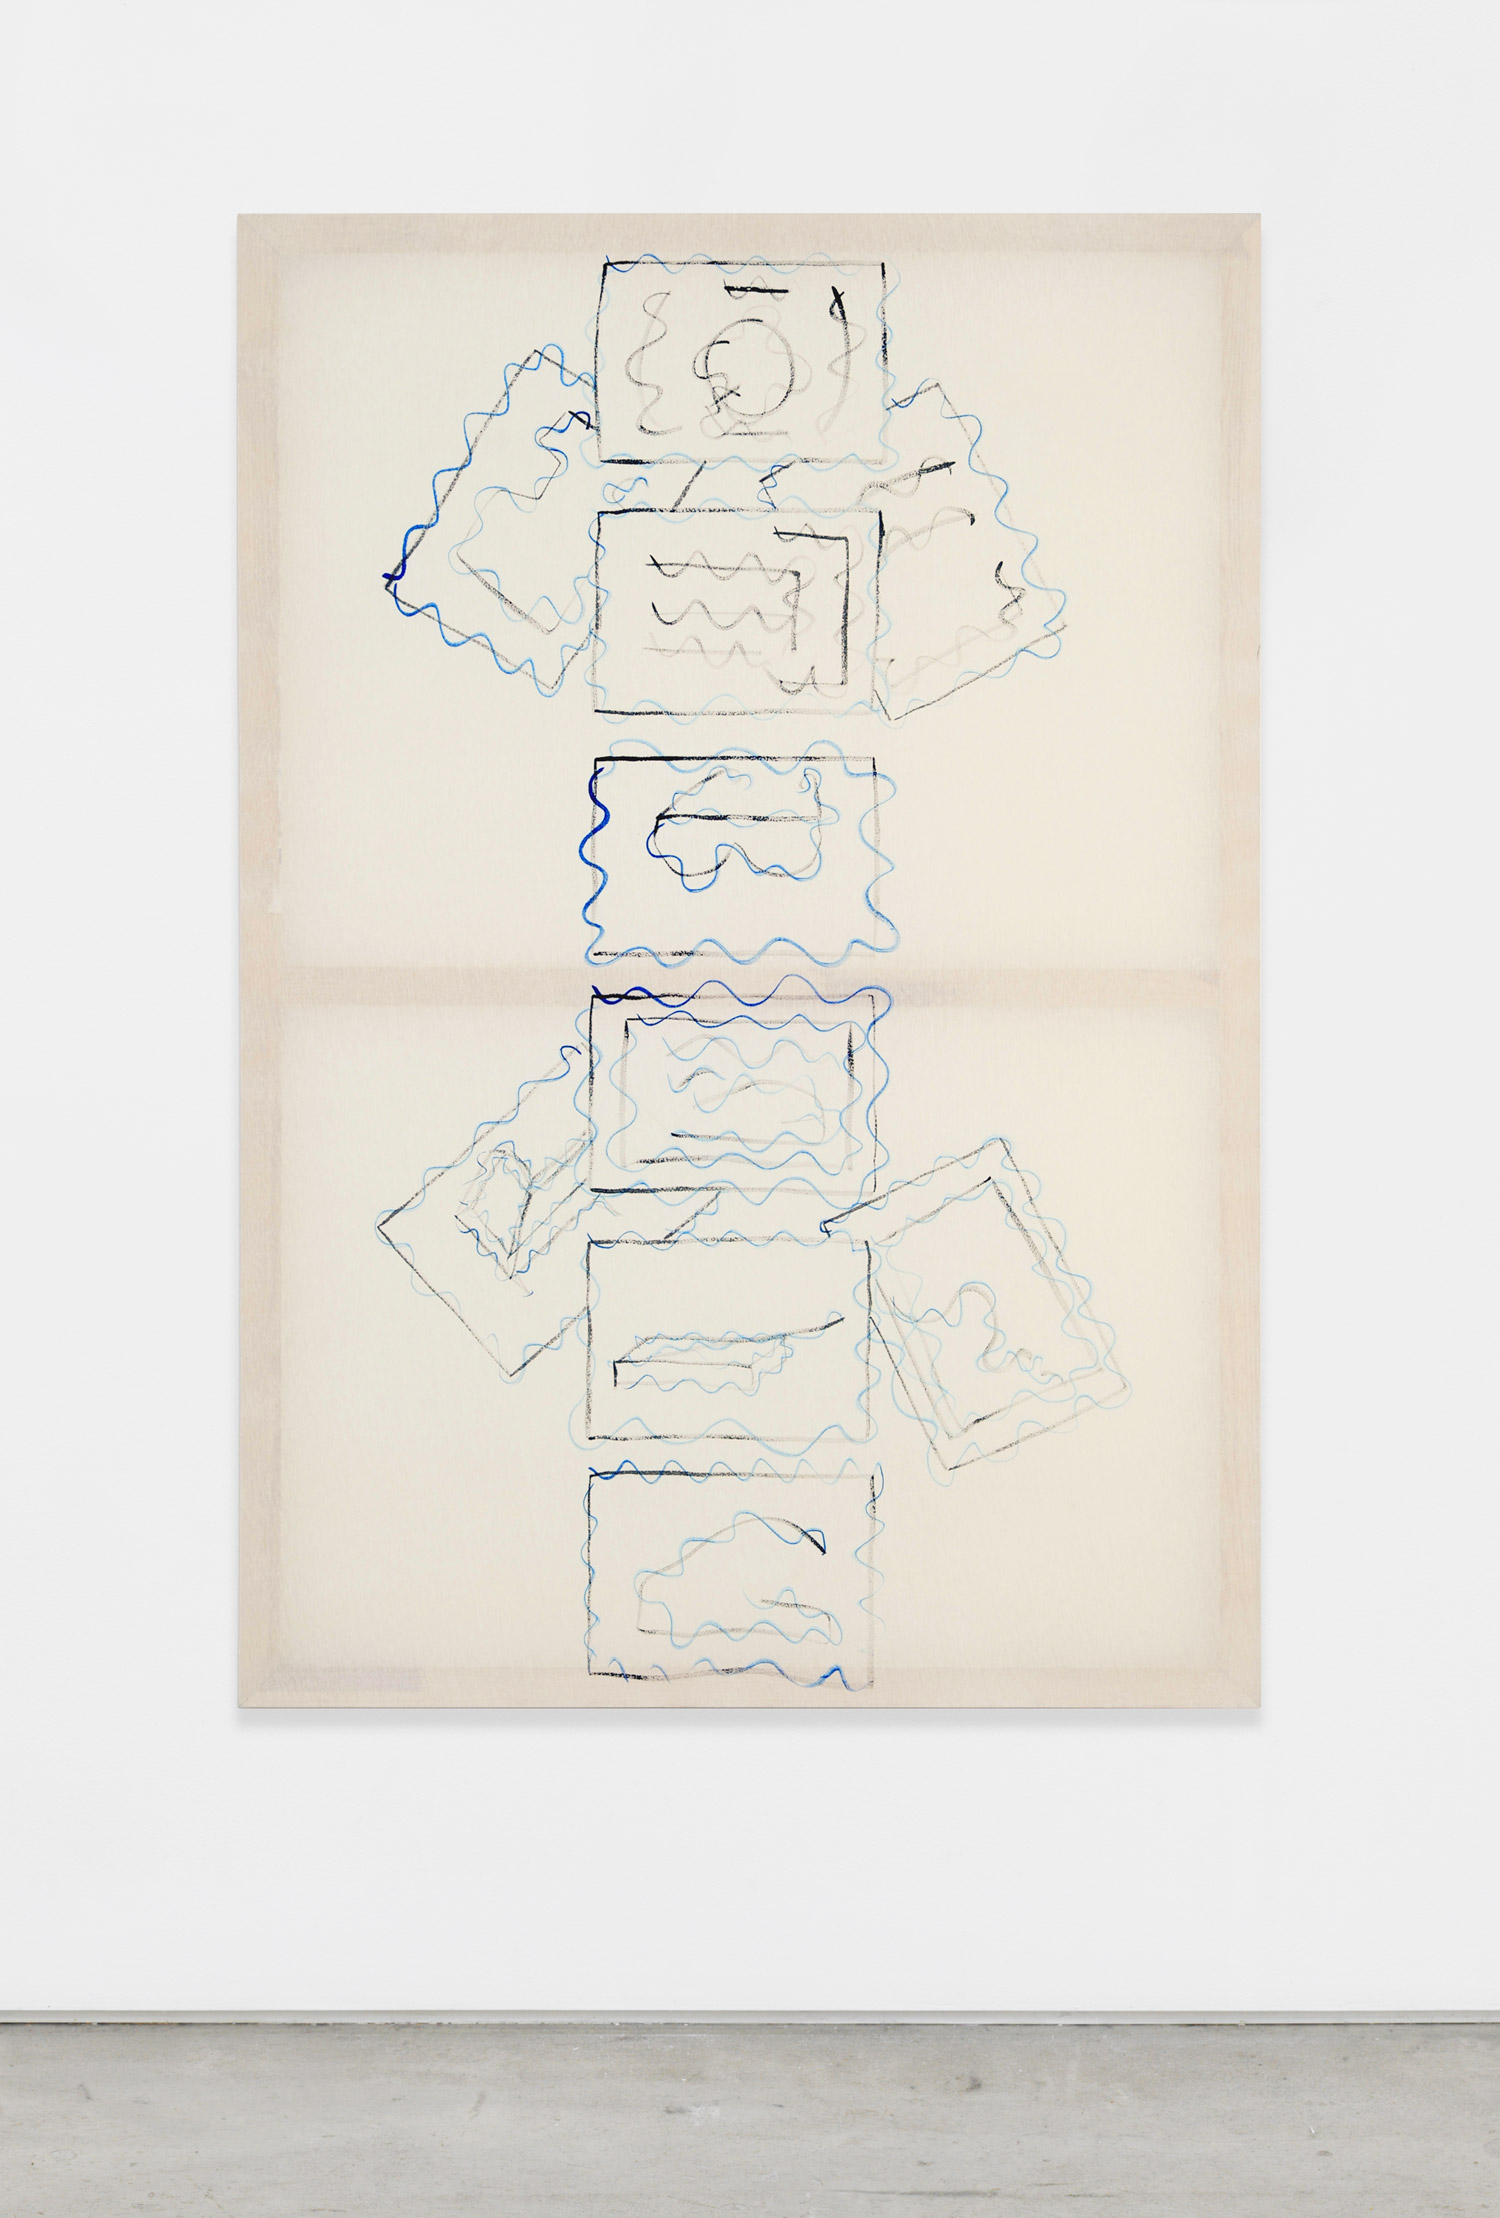 Gerda Scheepers, Design, 2009, acrylic paint on fabric, 62.99h x 43.31w in.